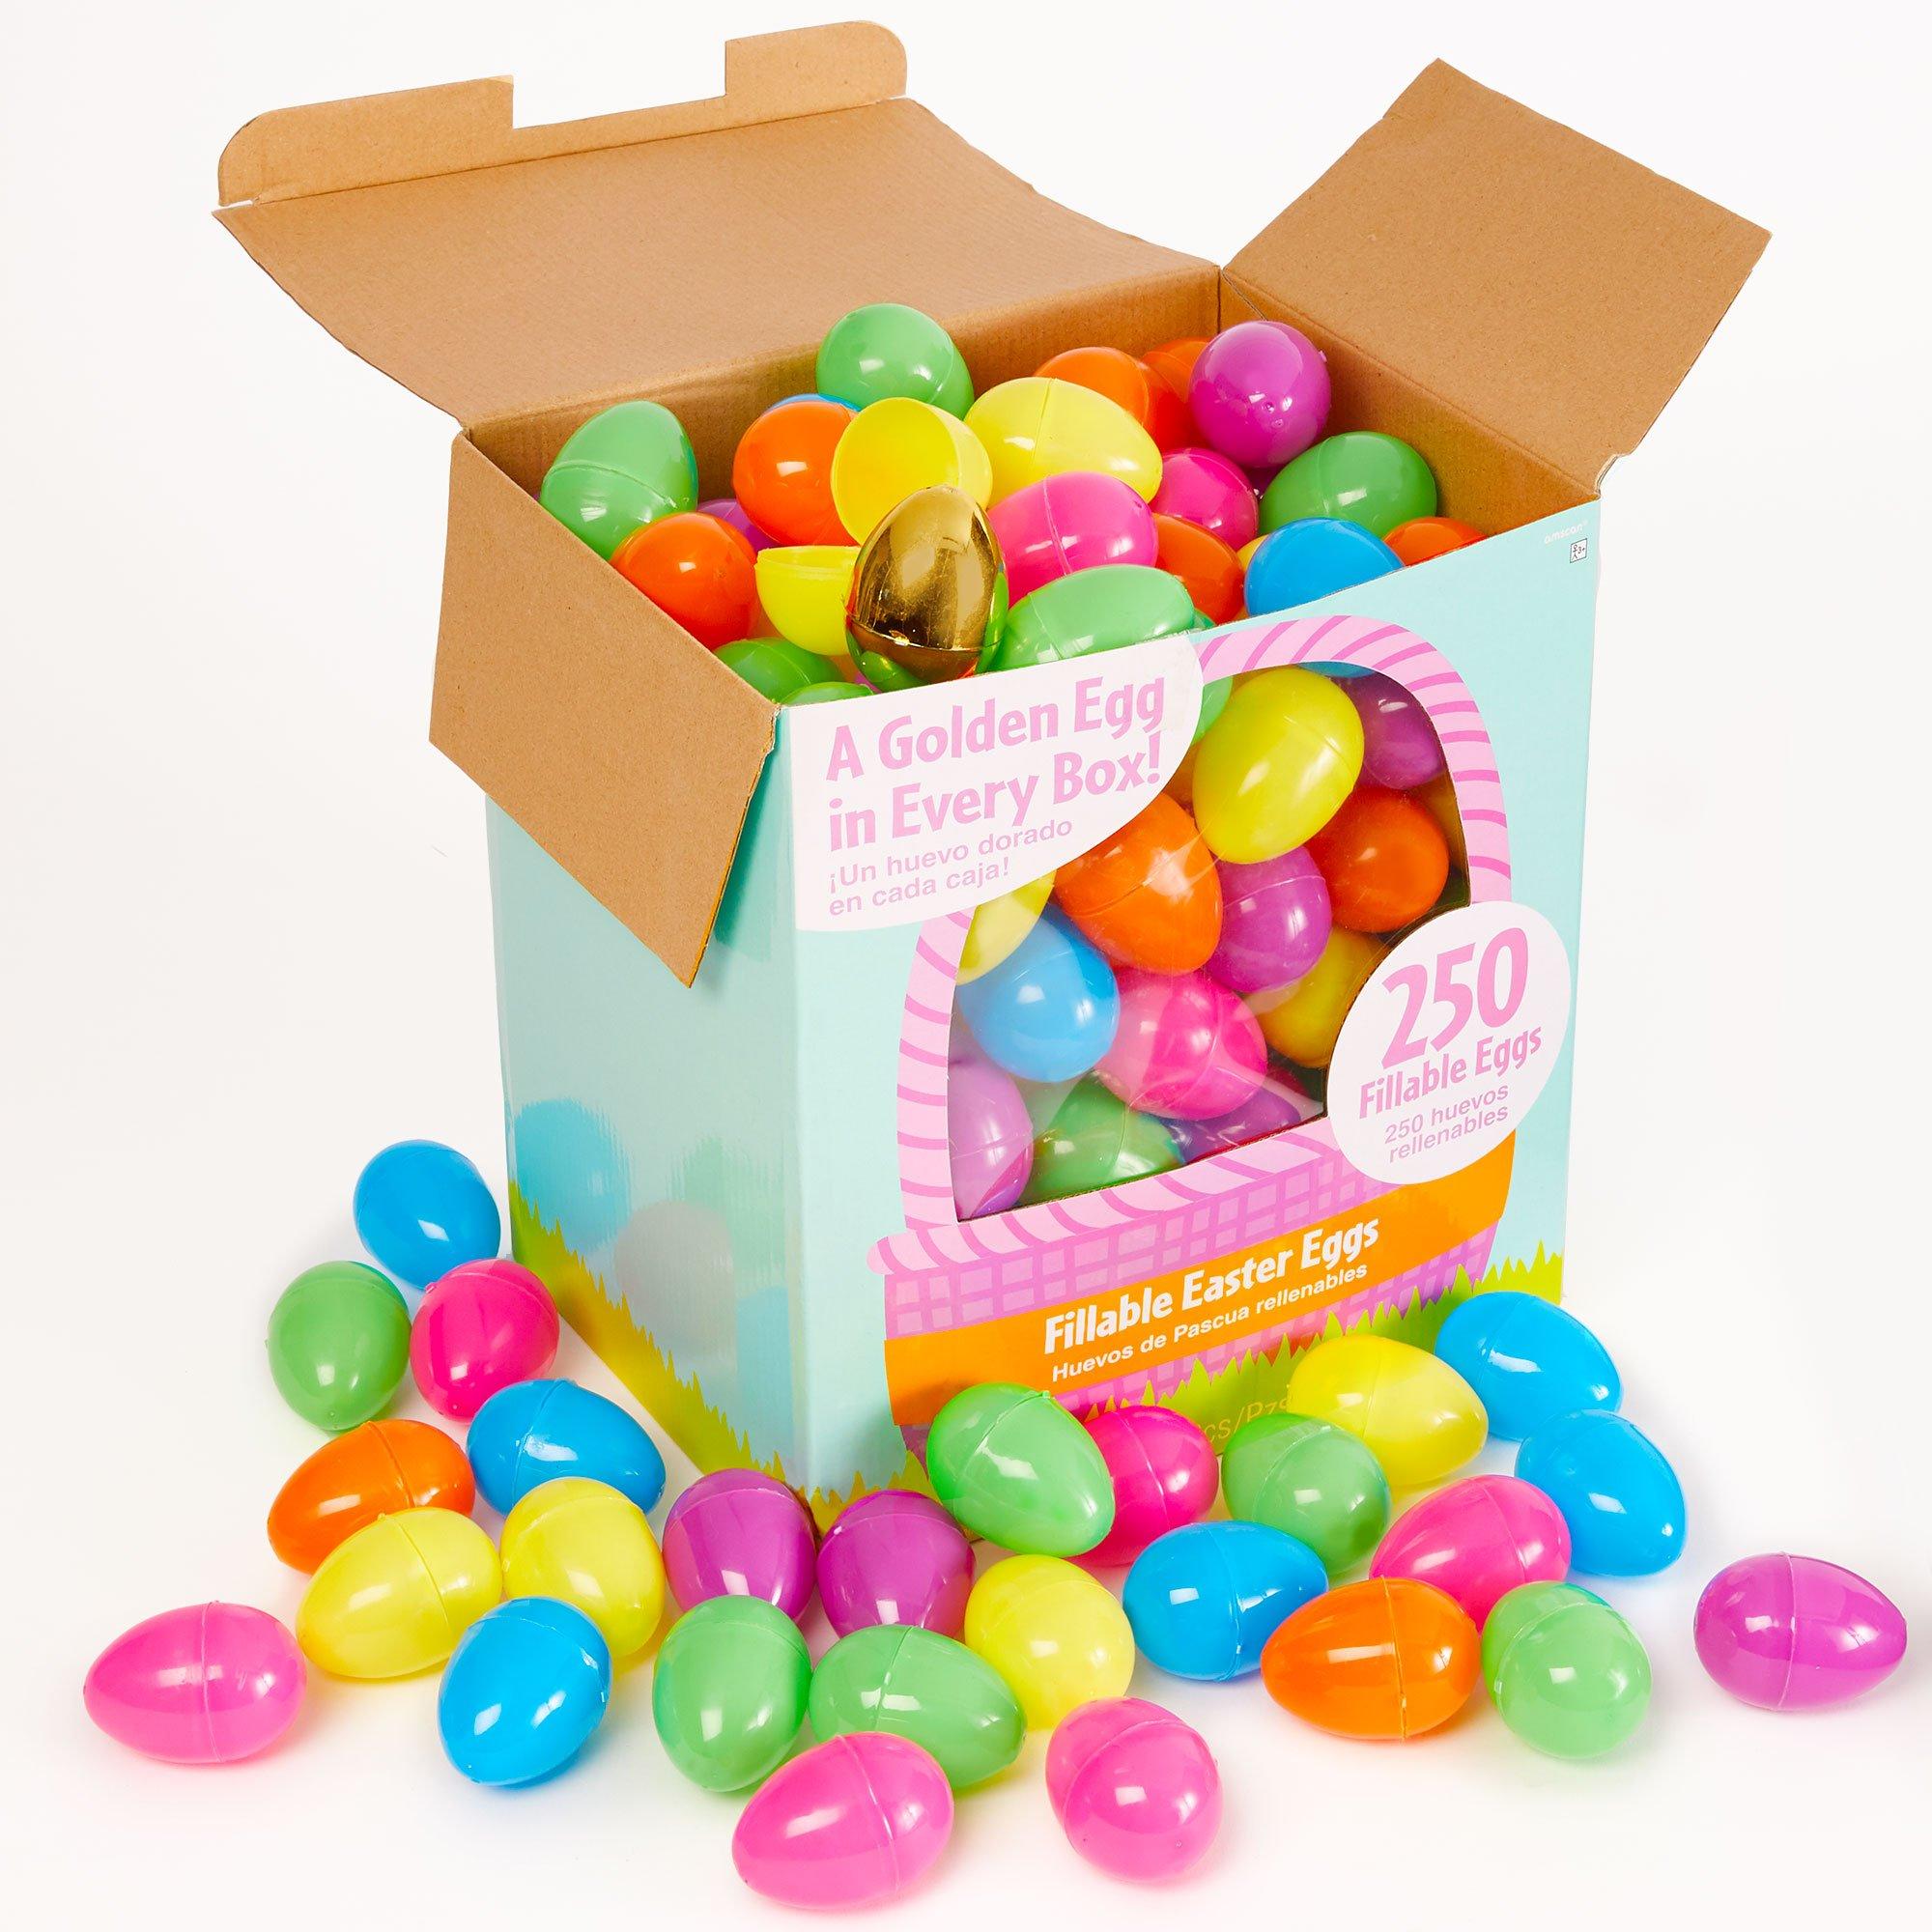 101 Pieces Fillable Easter Eggs,3.1'' Large Easter Eggs Empty, Colorful Bright Plastic Easter Eggs for Easter Eggs Hunt, Surprise Egg, Basket